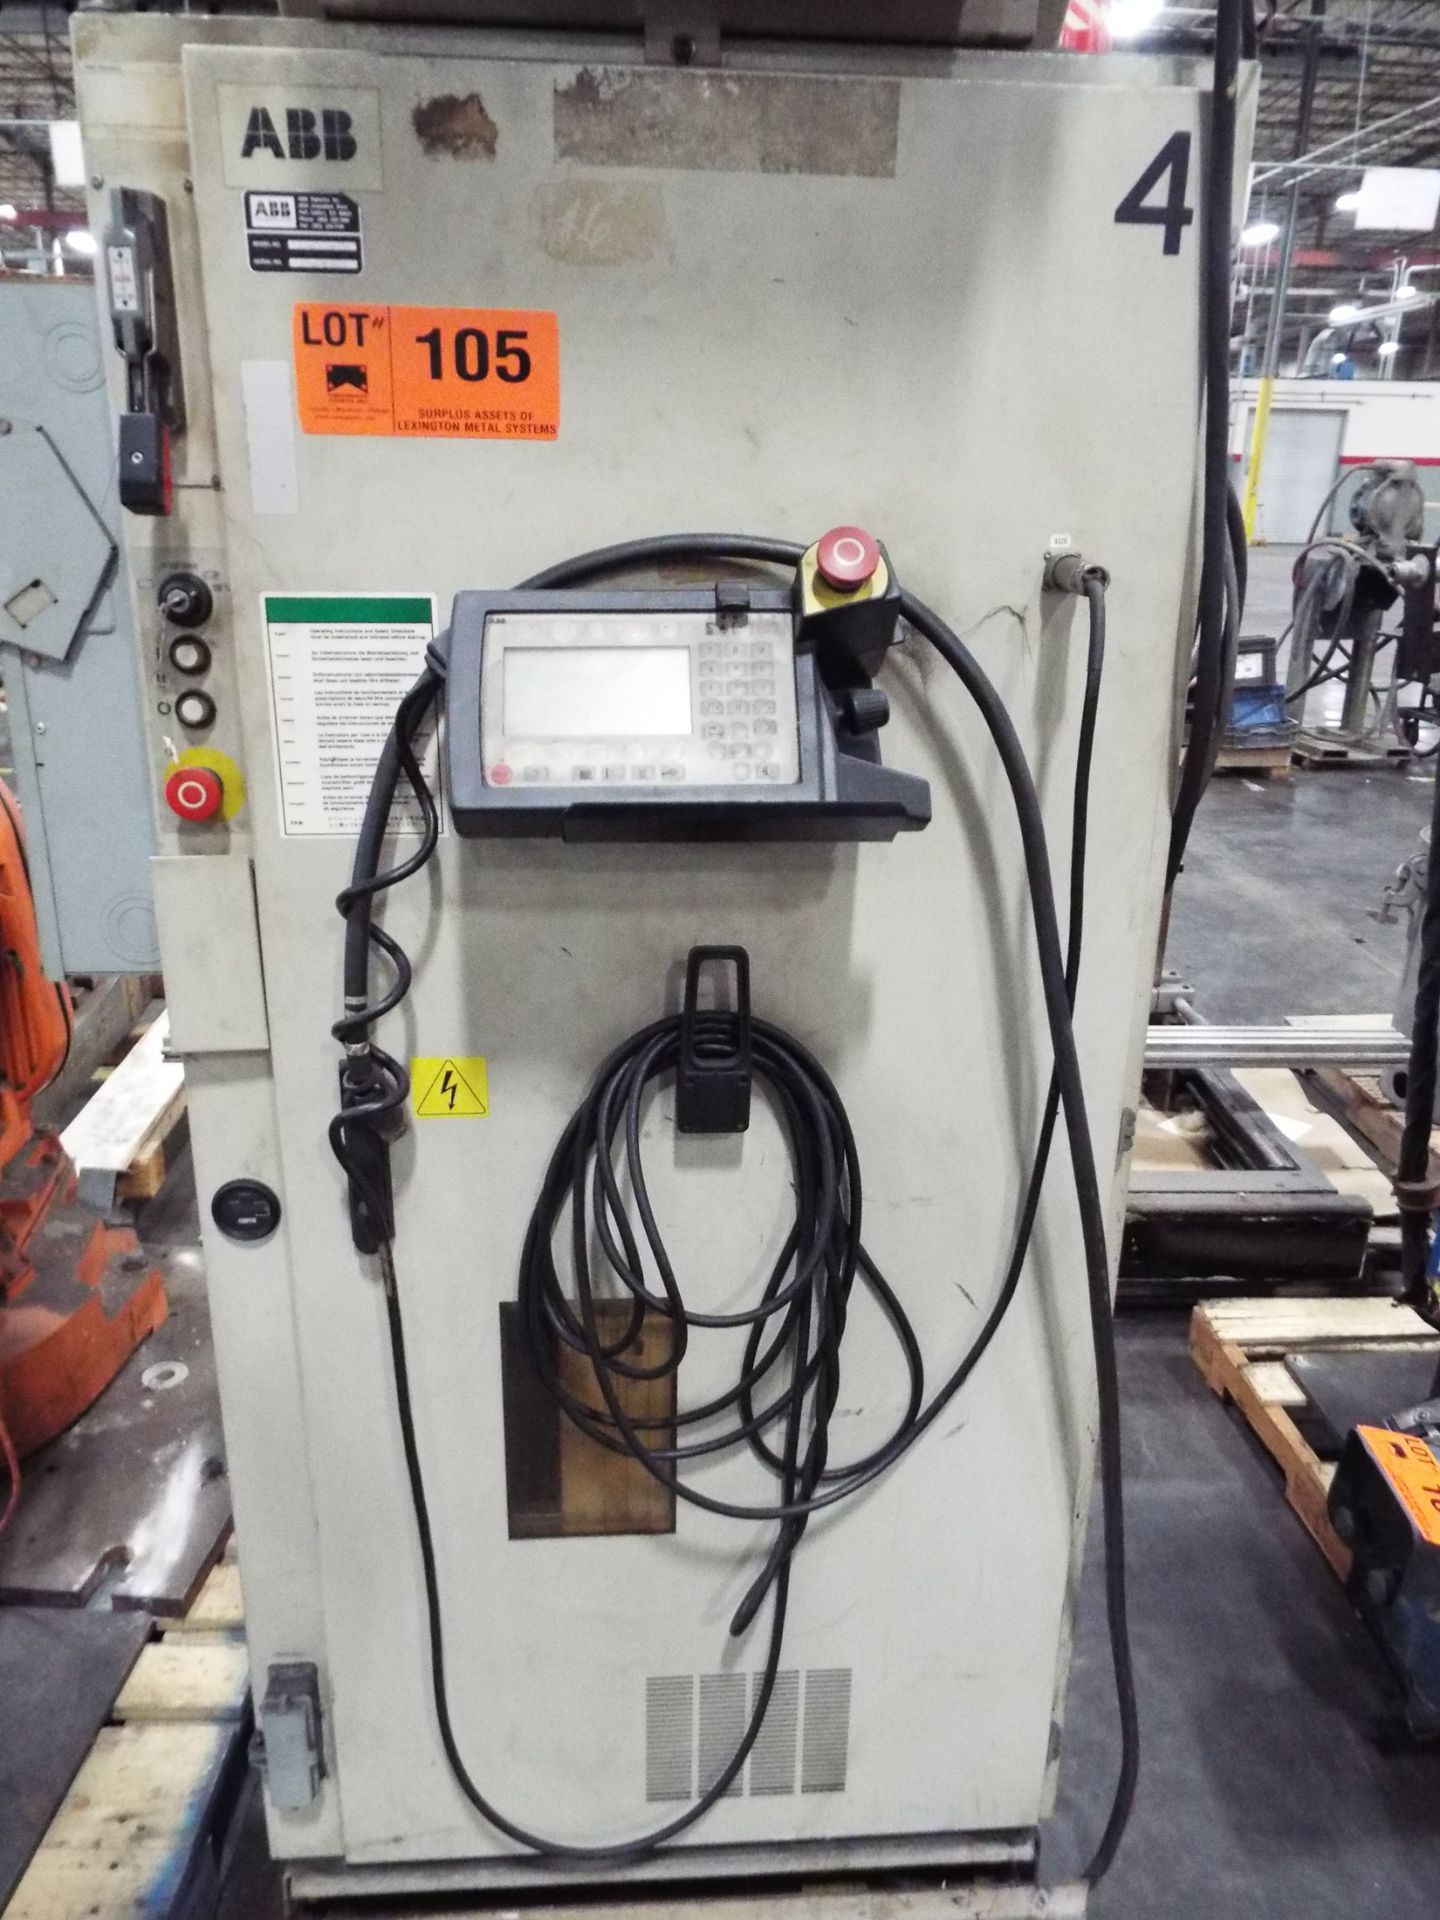 ABB IRB-2400 6 AXIS WELDING ROBOT WITH ABB IRB2400-0261 CONTROL, MILLER WIRE FEEDER, MILLER WIRE - Image 3 of 6